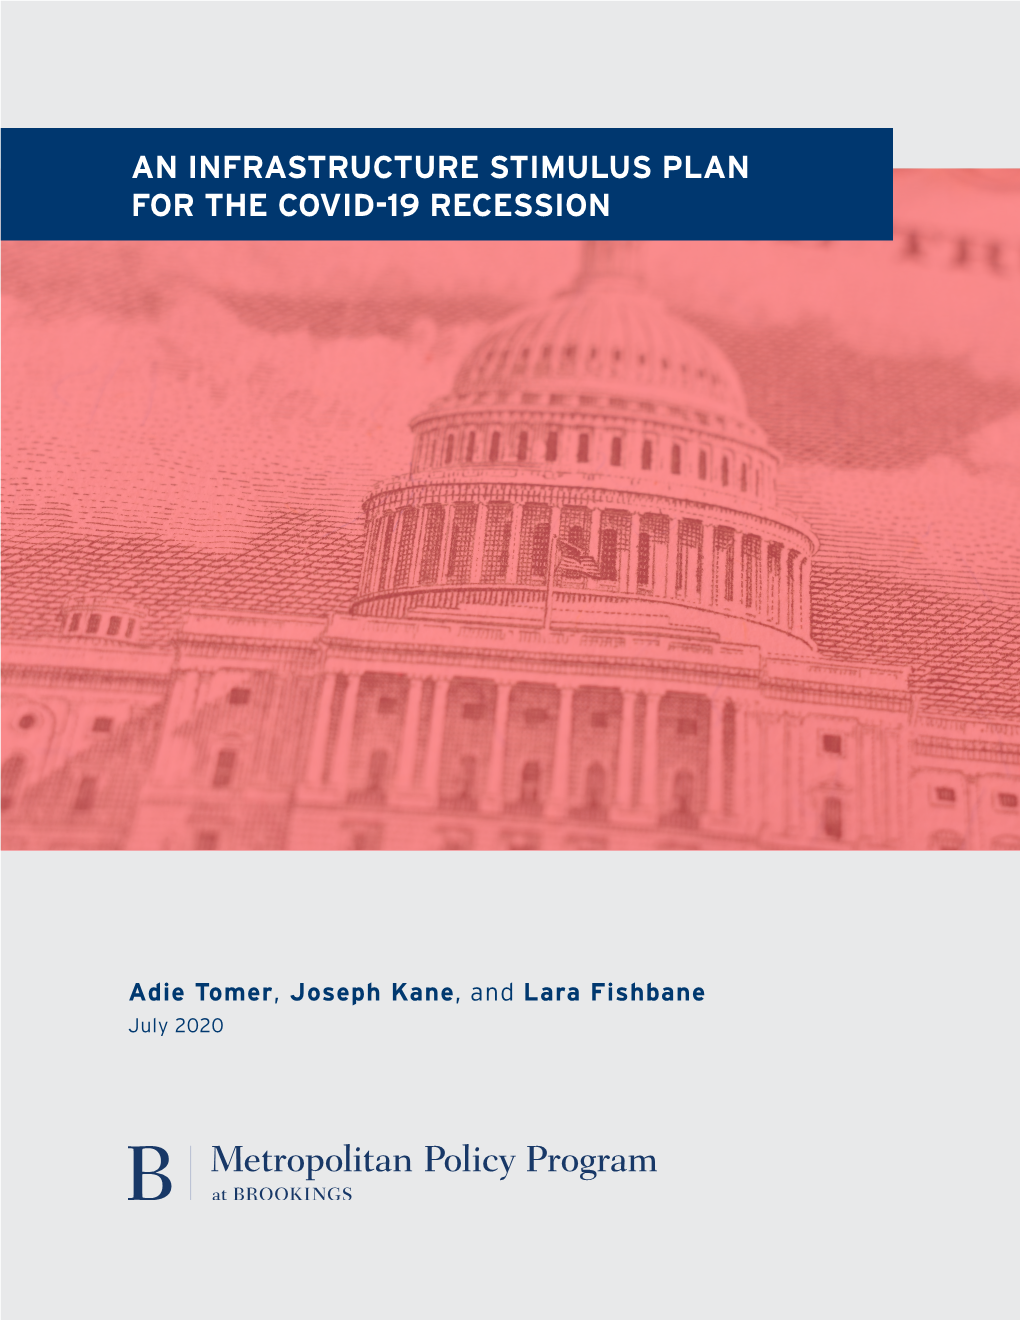 An Infrastructure Stimulus Plan for the Covid-19 Recession